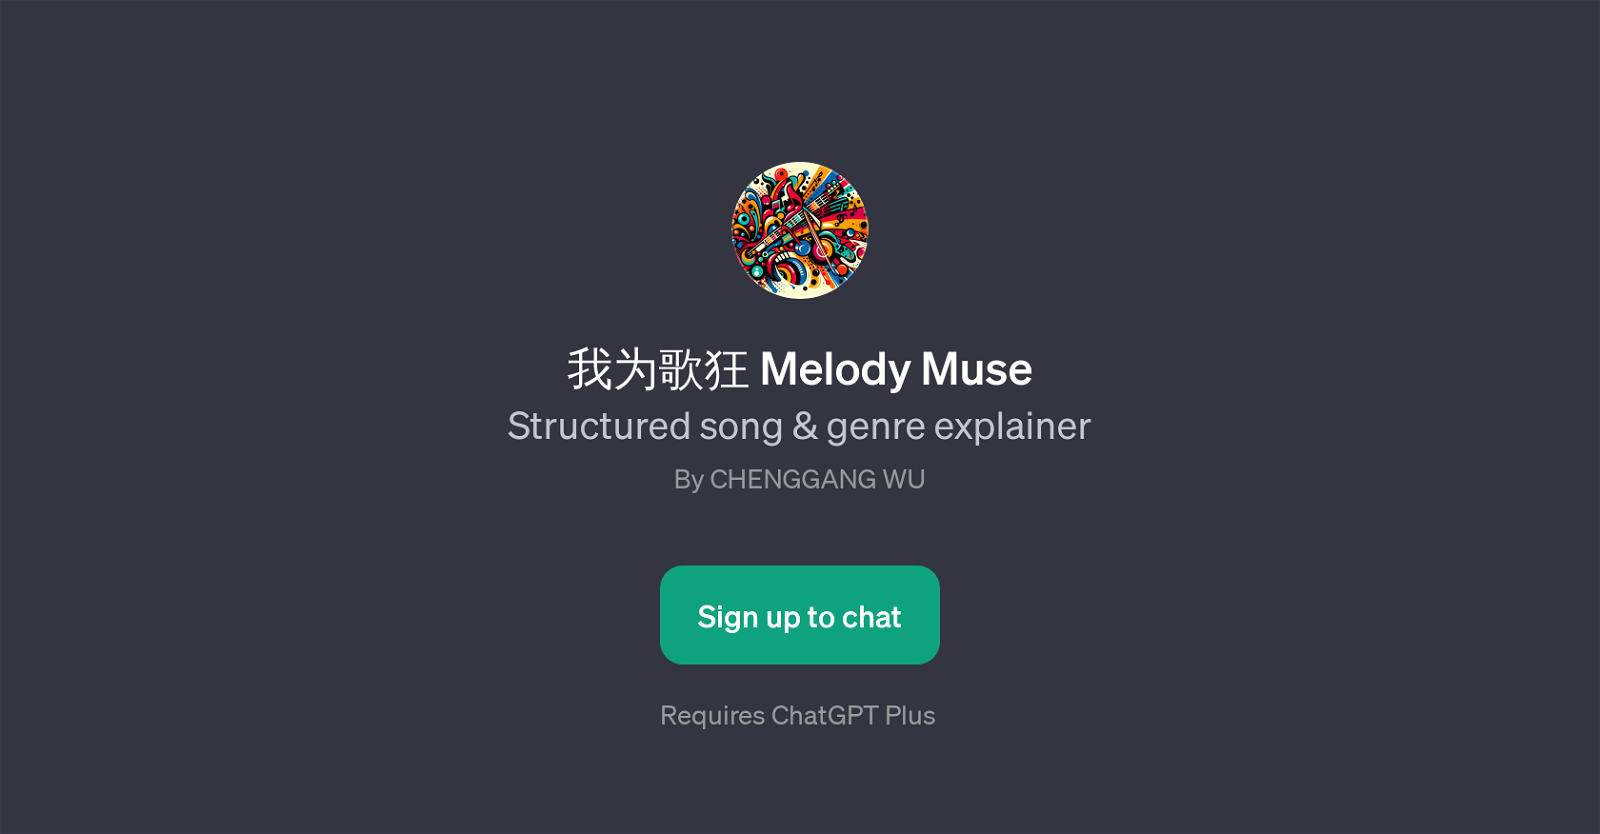 Melody Muse website